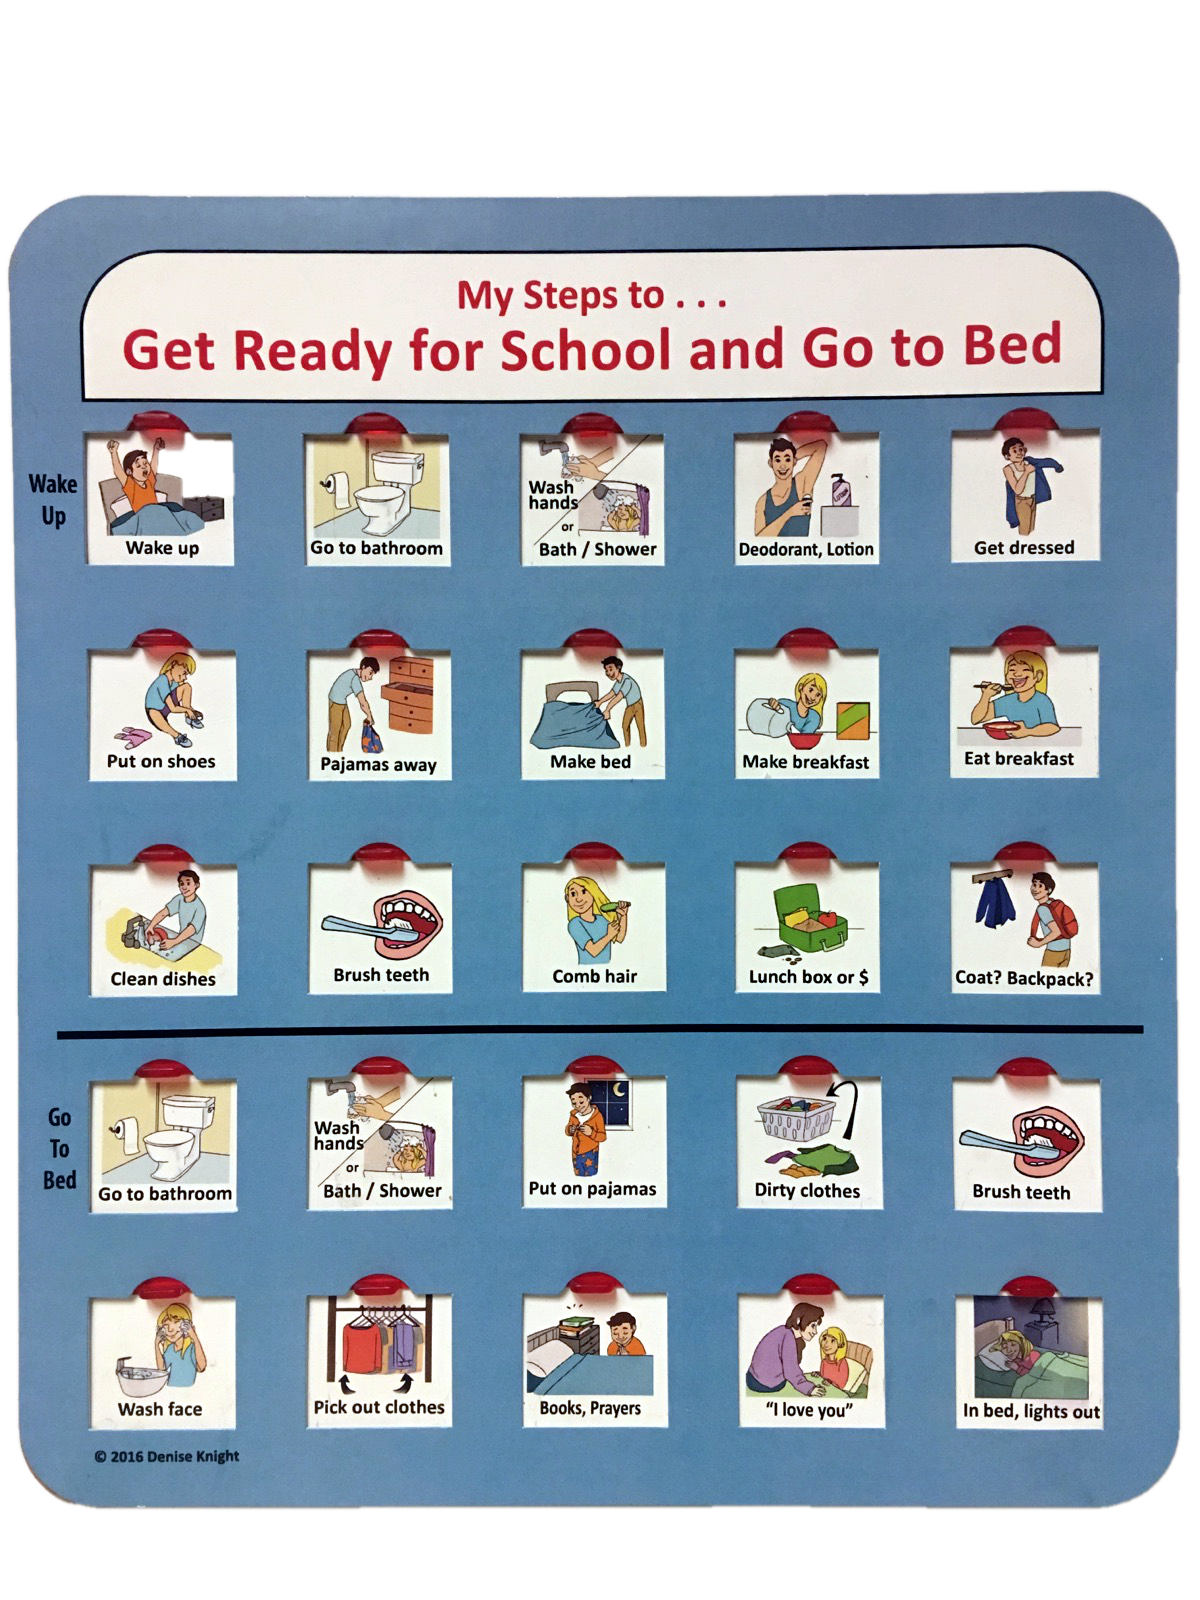 Get%20Ready%20for%20School%20and%20Go%20to%20Bed Pictures 1_05045b0815c1b1047f45106c177982b3